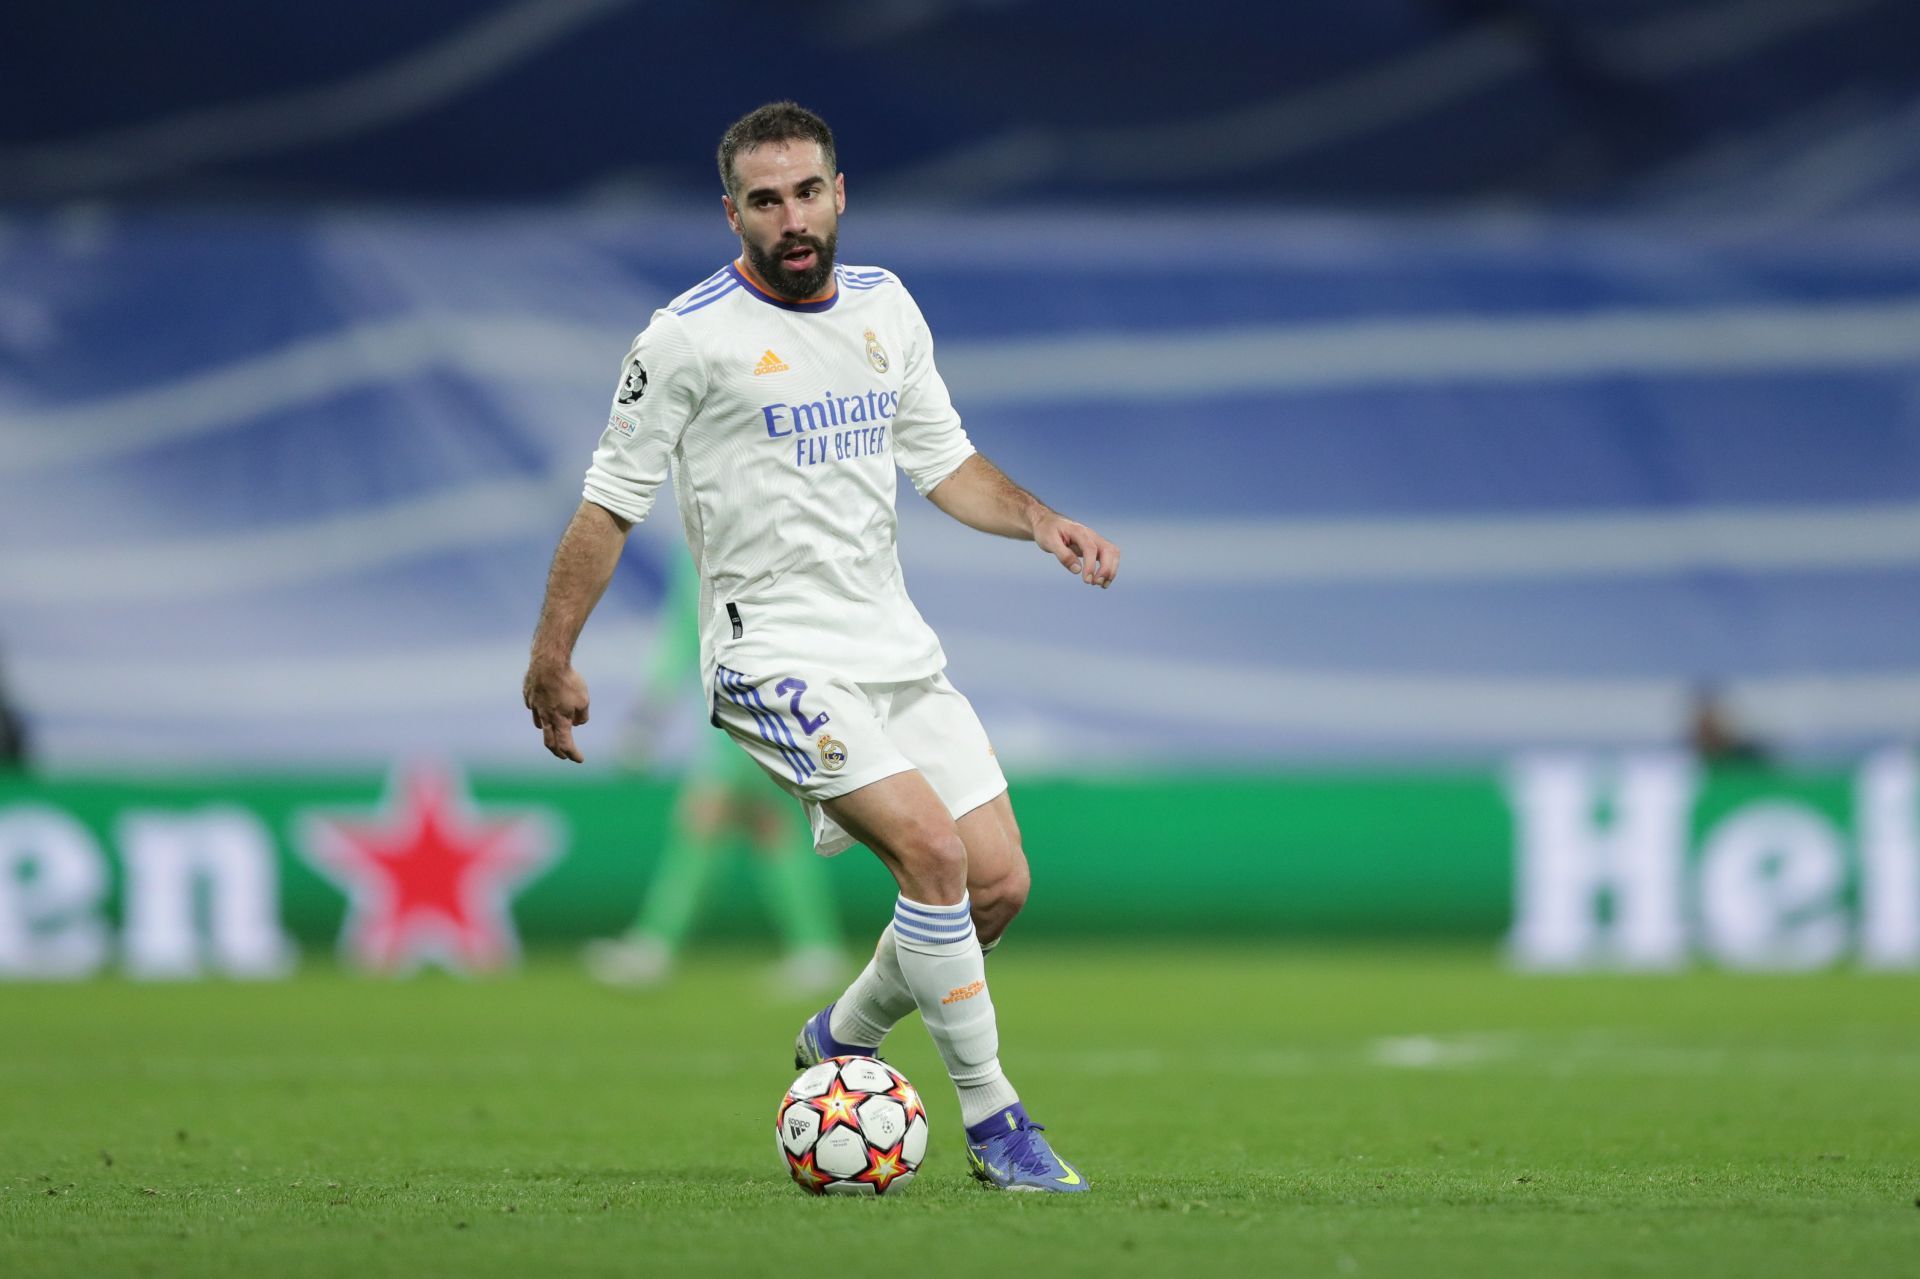 Dani Carvajal, who gave PSG a penalty, was one of the worst players on the pitch on Tuesday night